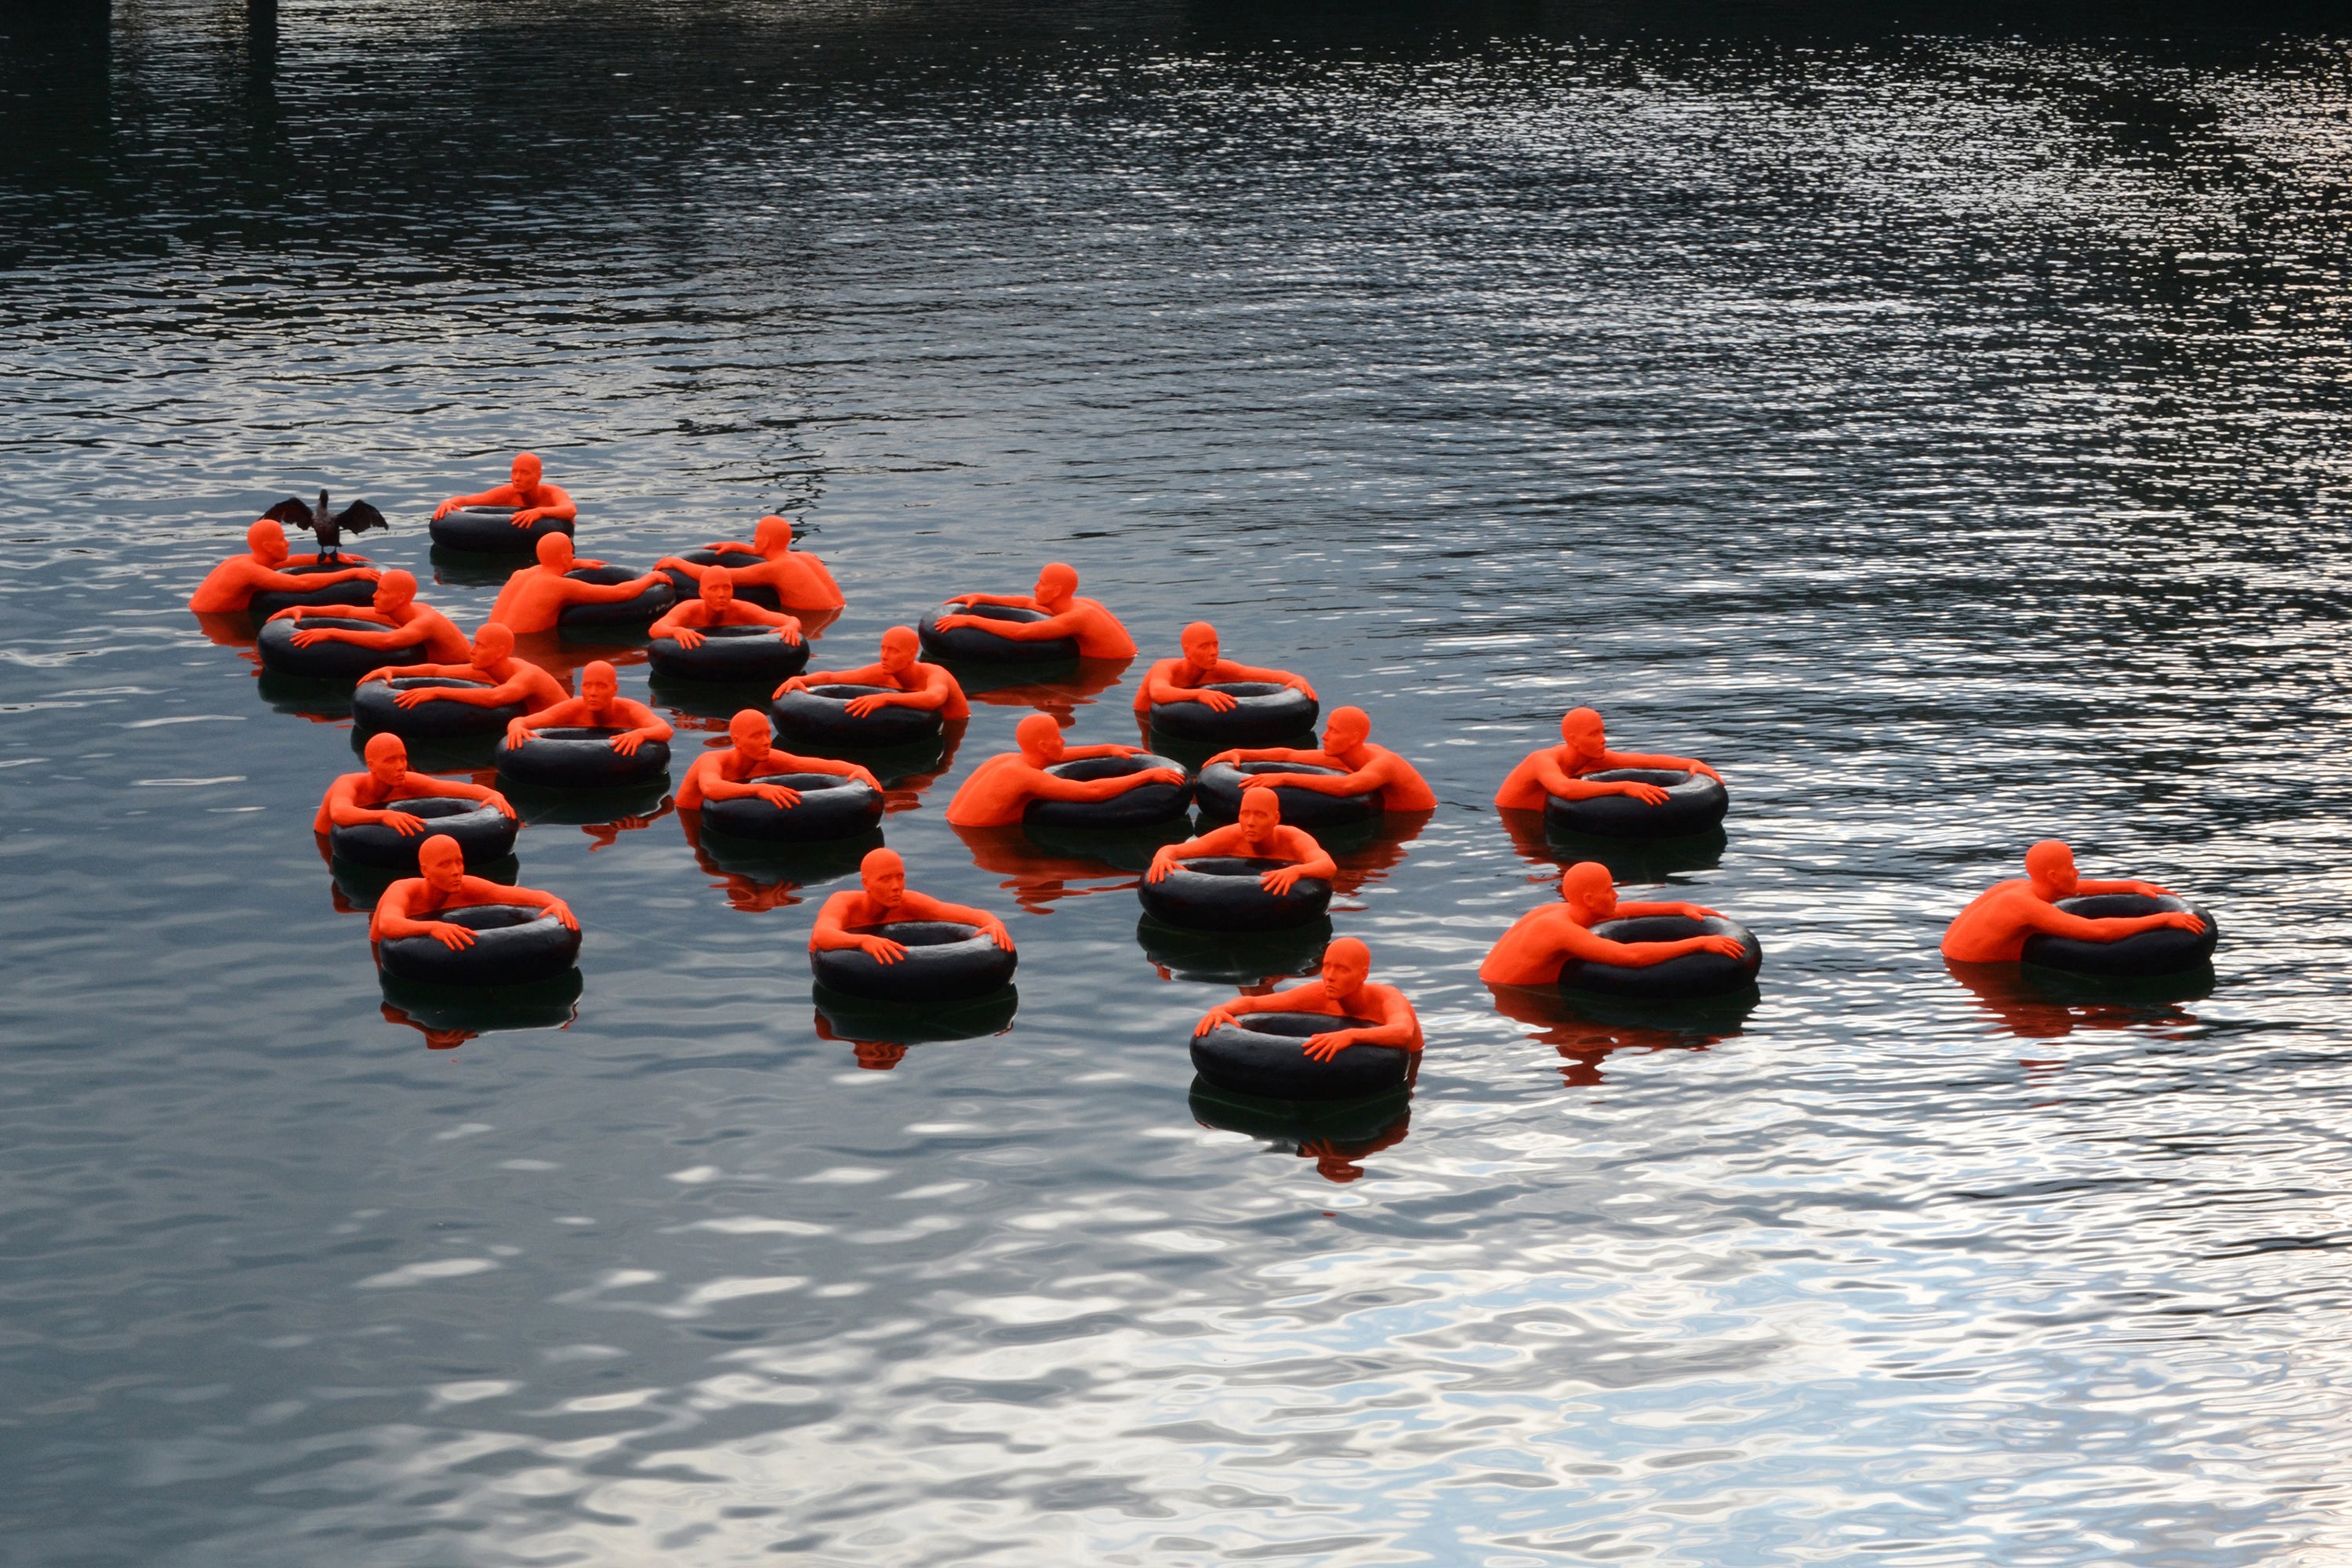 Image of the Safety Orange Swimmers floating in the water.